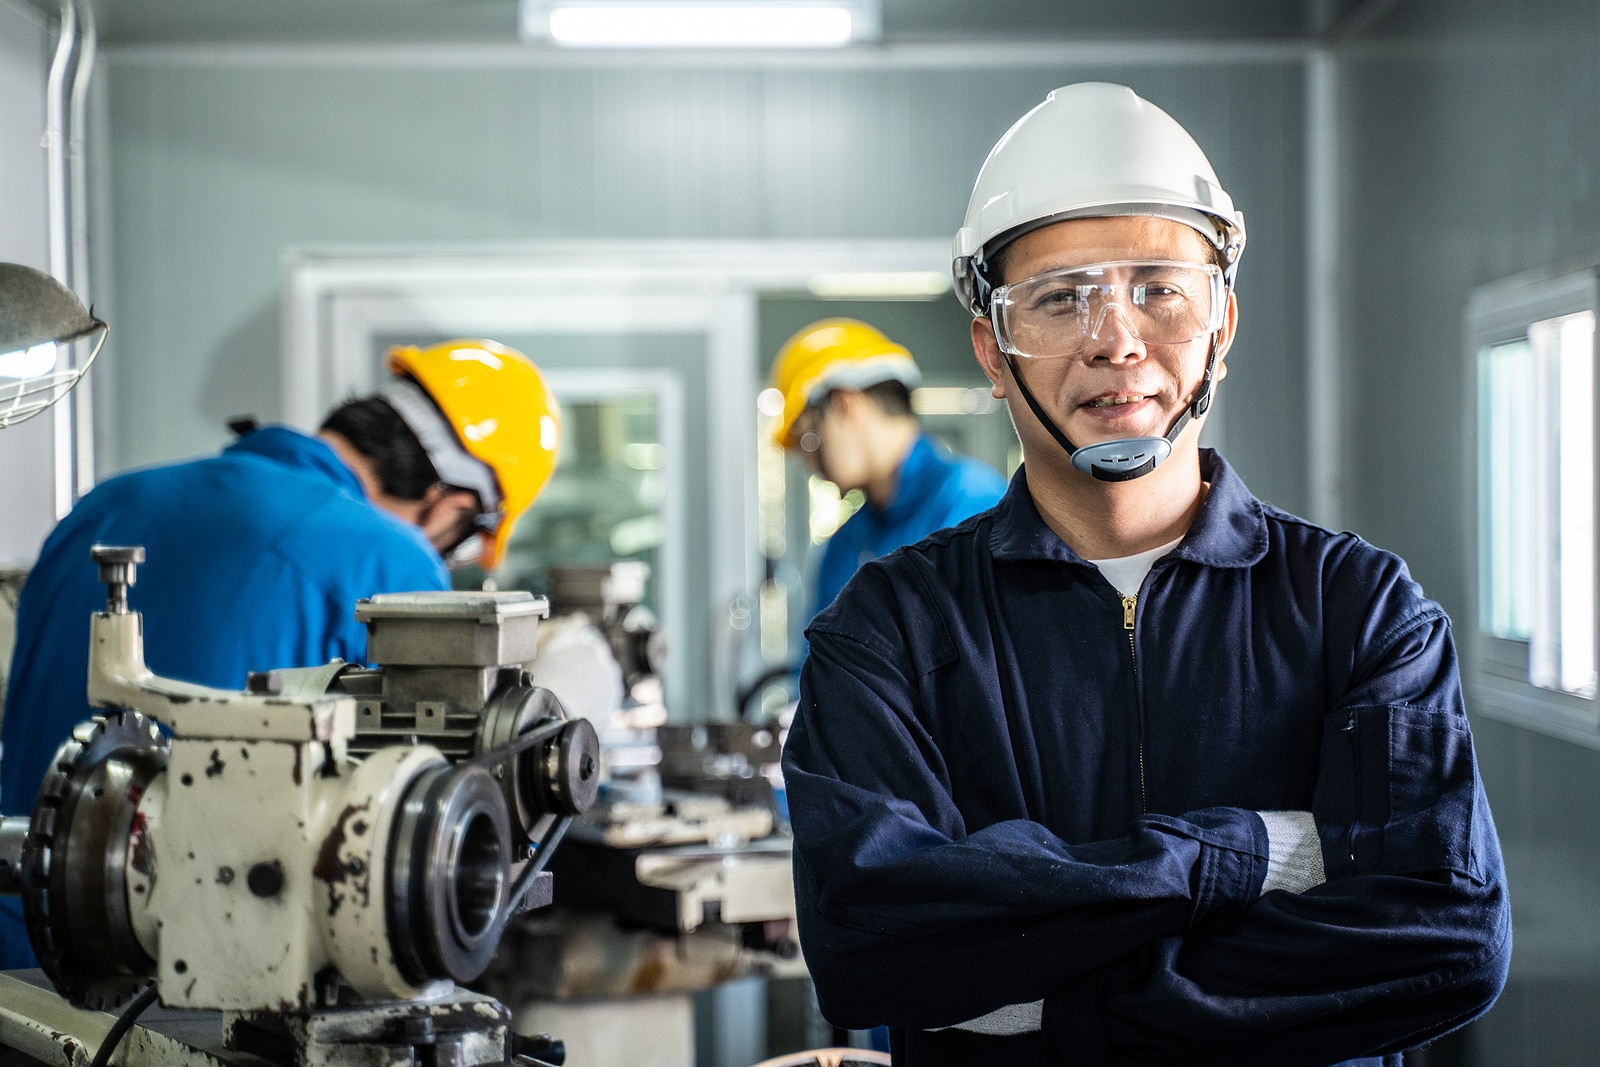 Industry Safety Wear: The Importance of Wearing Proper Protective Gear on the Job